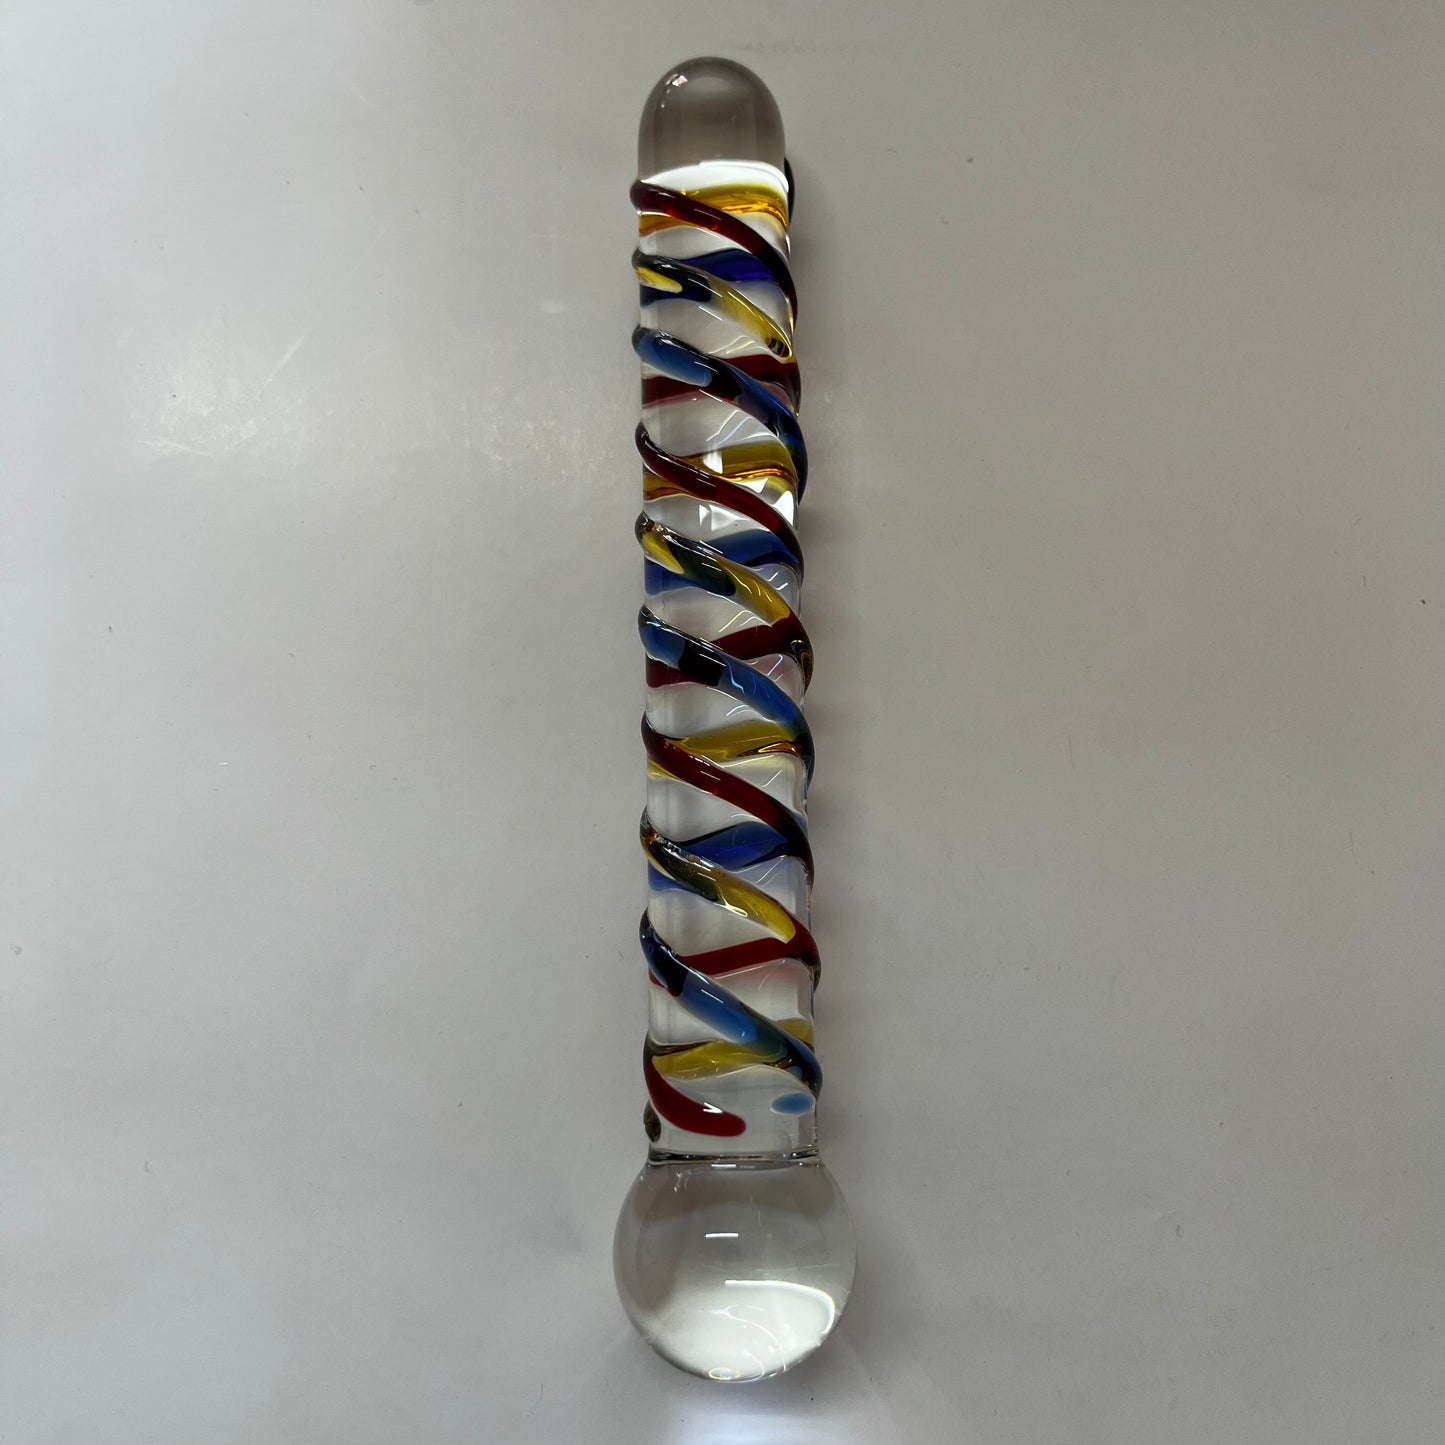 GLASS DILDO YELLOW, RED AND BLUE SPIRAL